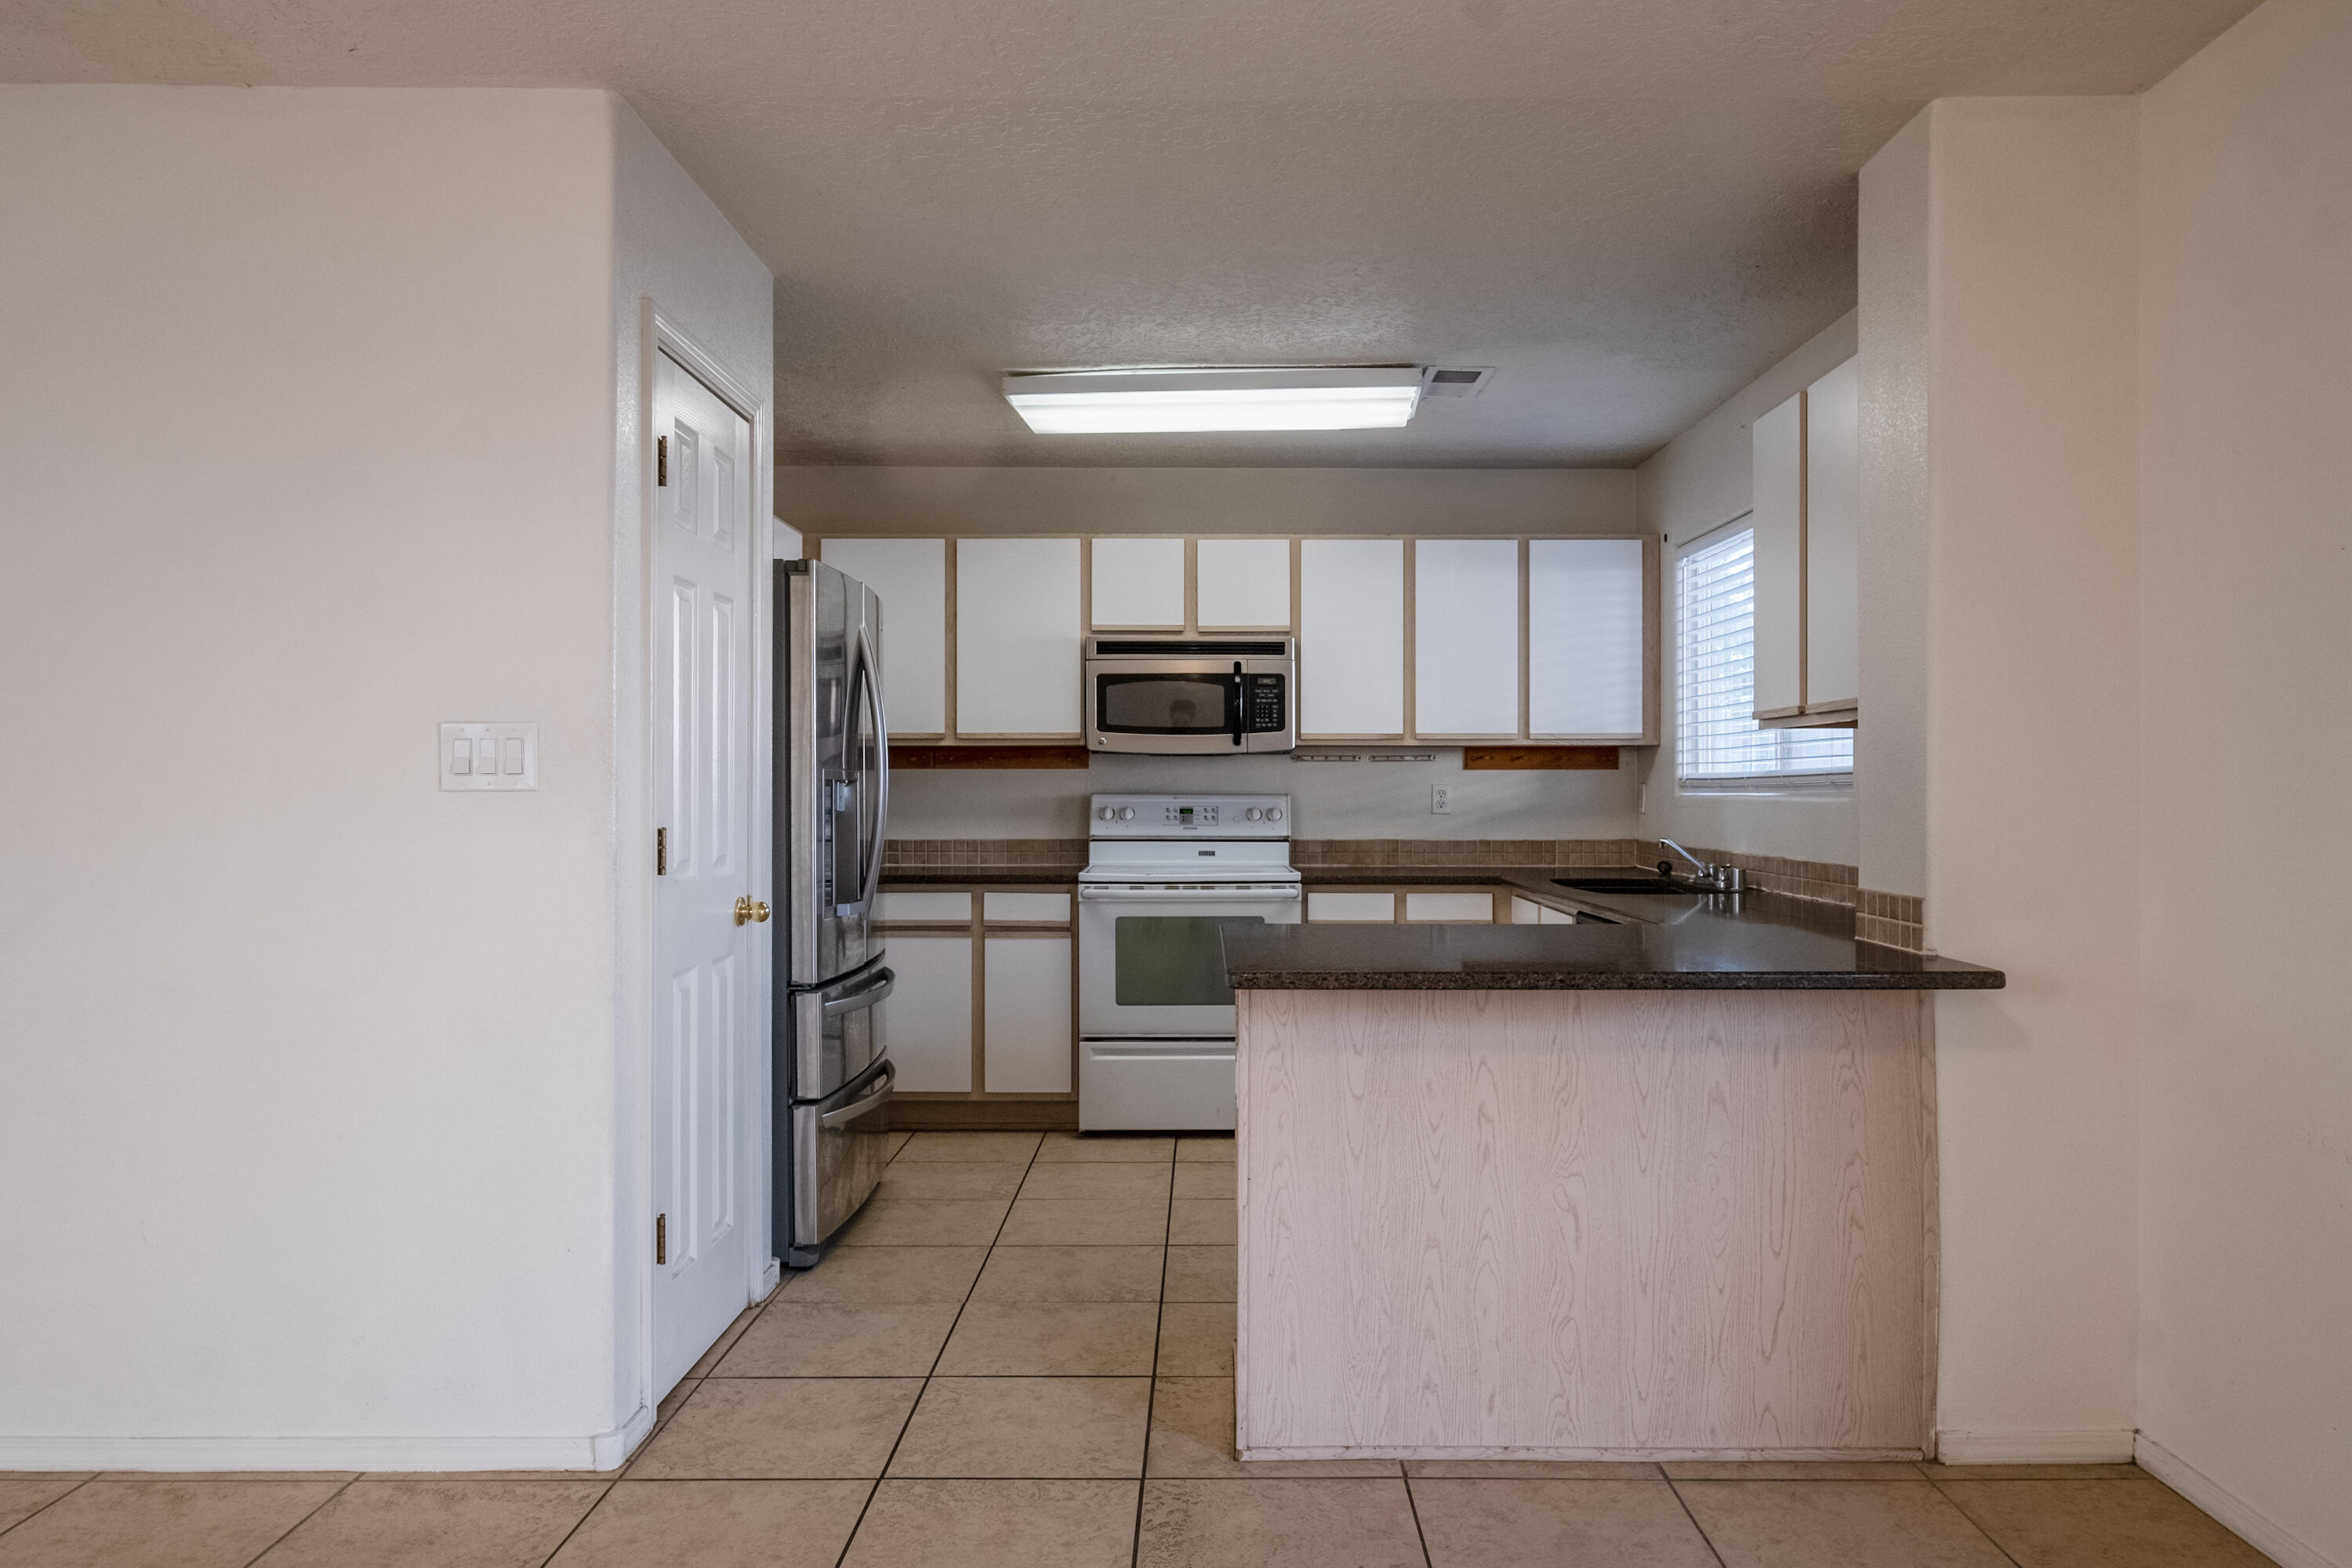 8612 Gunnison Place NW, Albuquerque, New Mexico 87120, 3 Bedrooms Bedrooms, ,3 BathroomsBathrooms,Residential,For Sale,8612 Gunnison Place NW,1059731